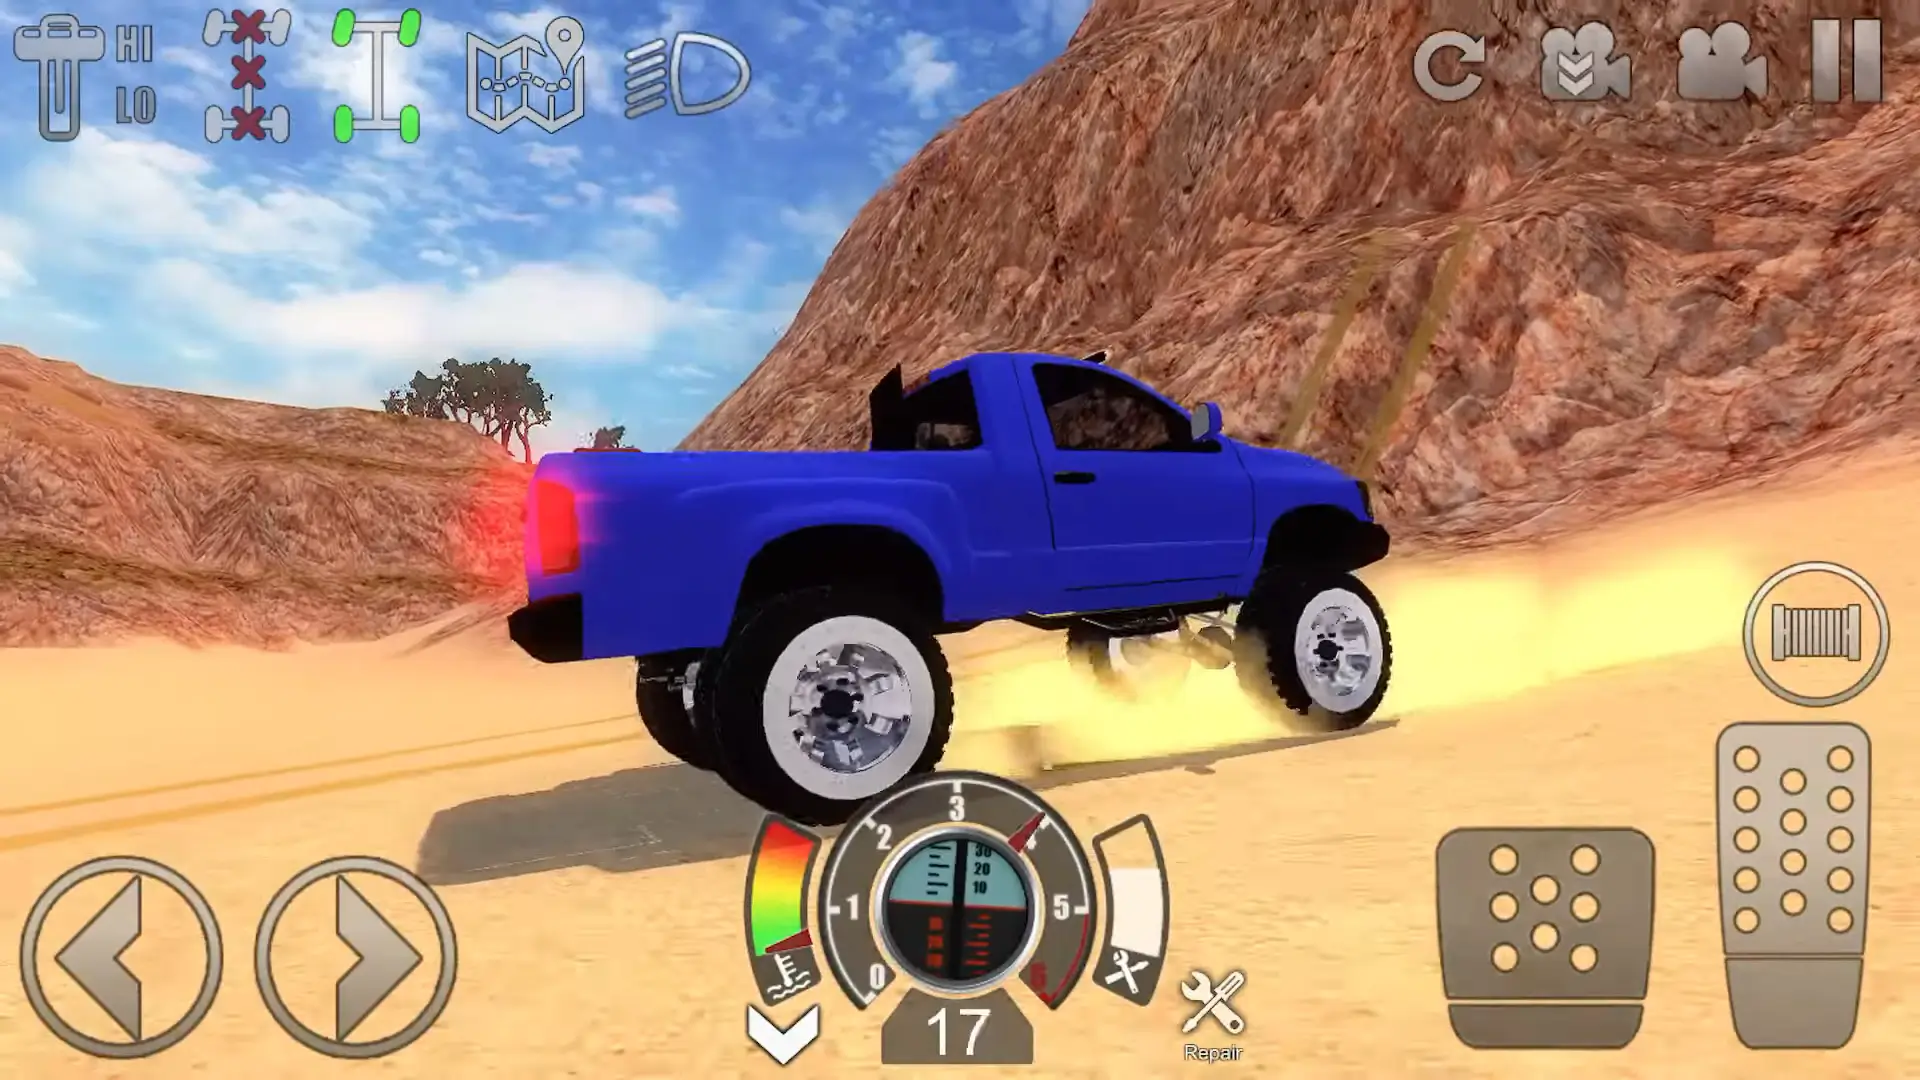 Offroad Outlaws Mod Apk v6.6.7 Free Download for Android